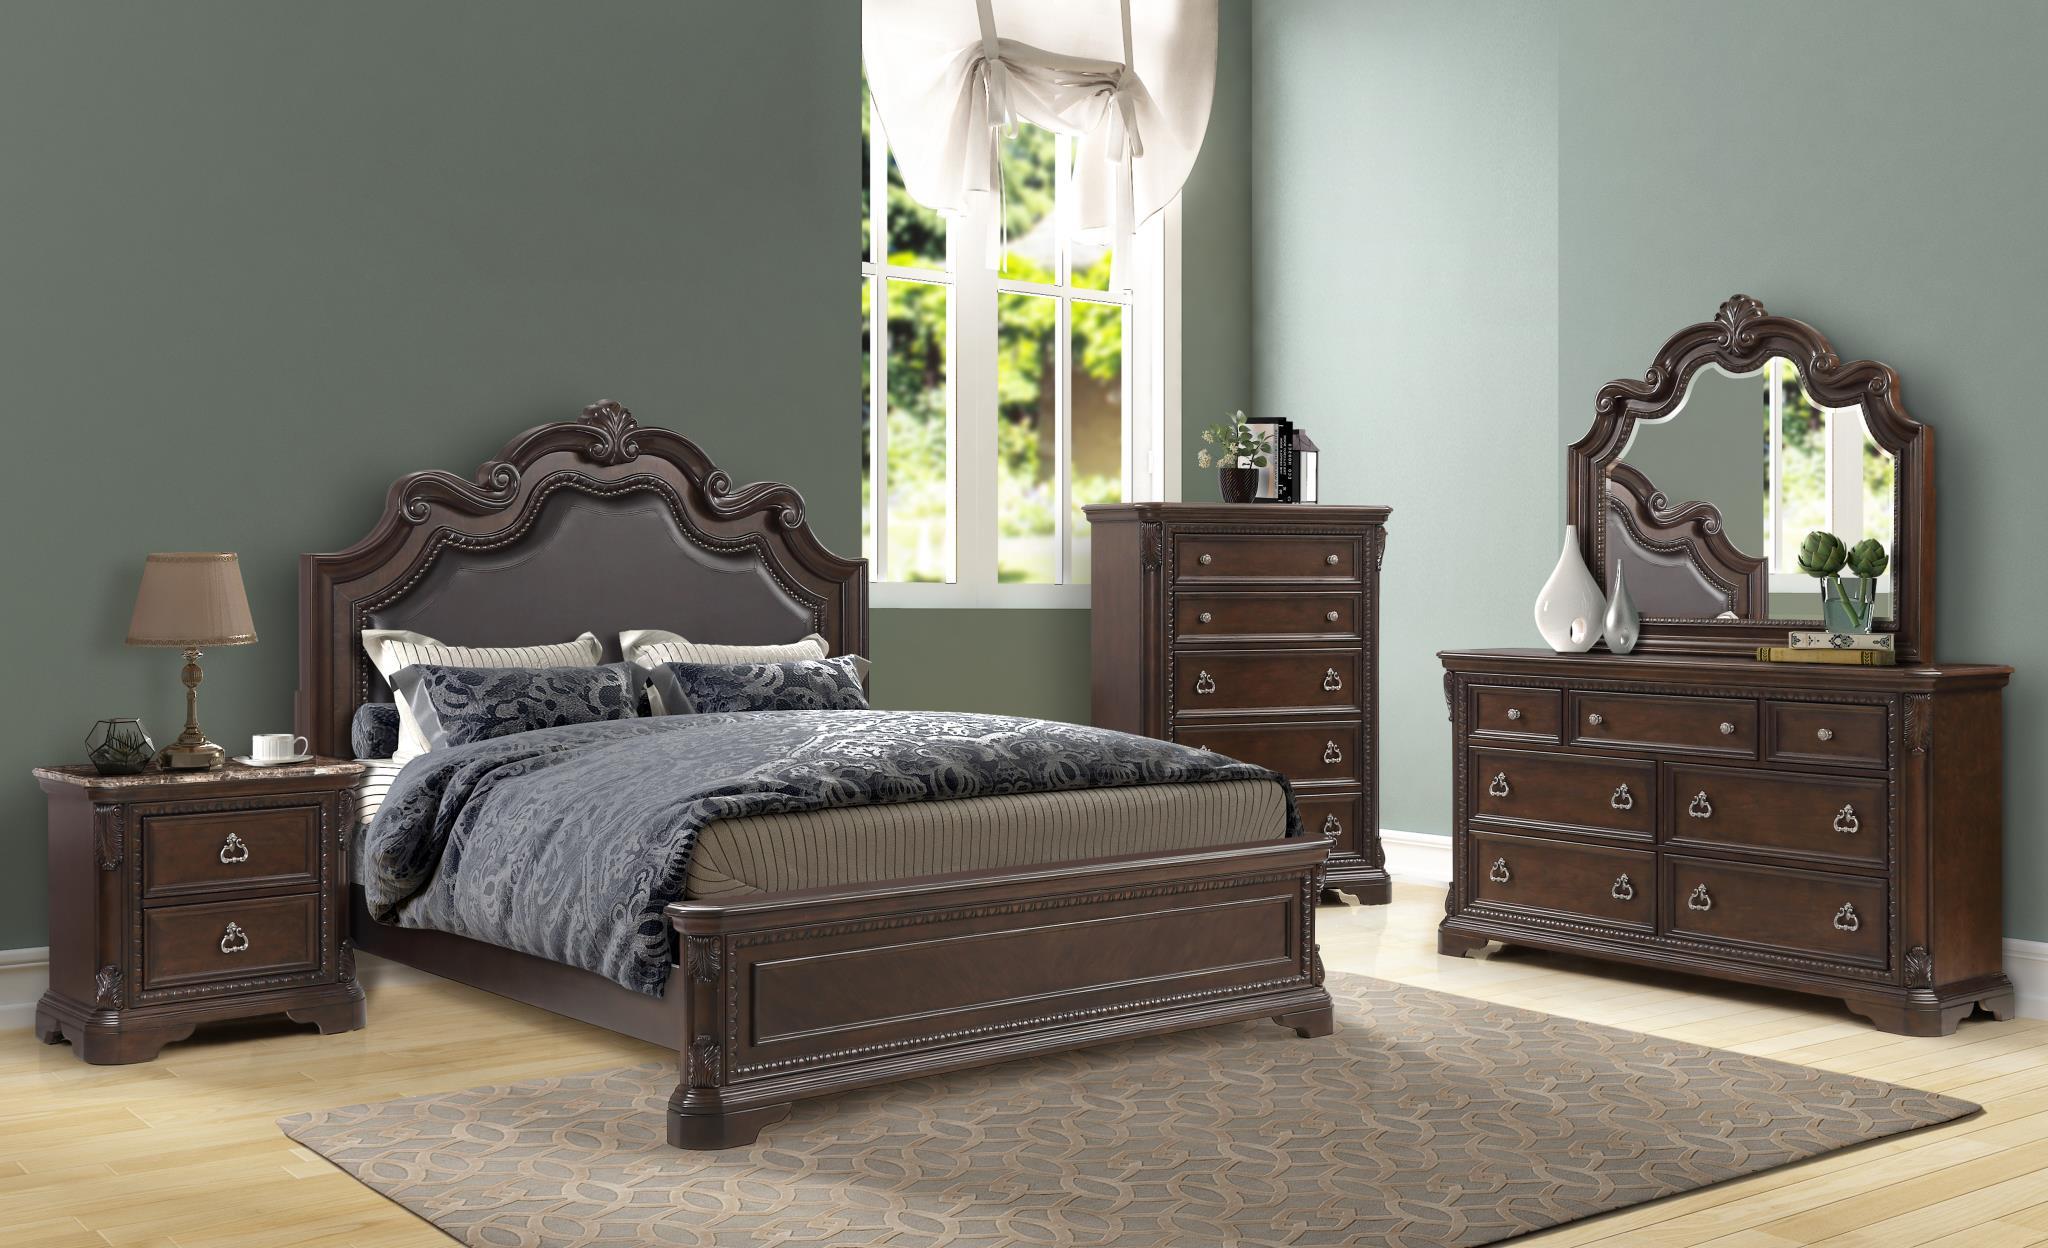 Modern, Transitional Panel Bed COVENTRY 1988-112 1988-112 in Mahogany Bonded Leather